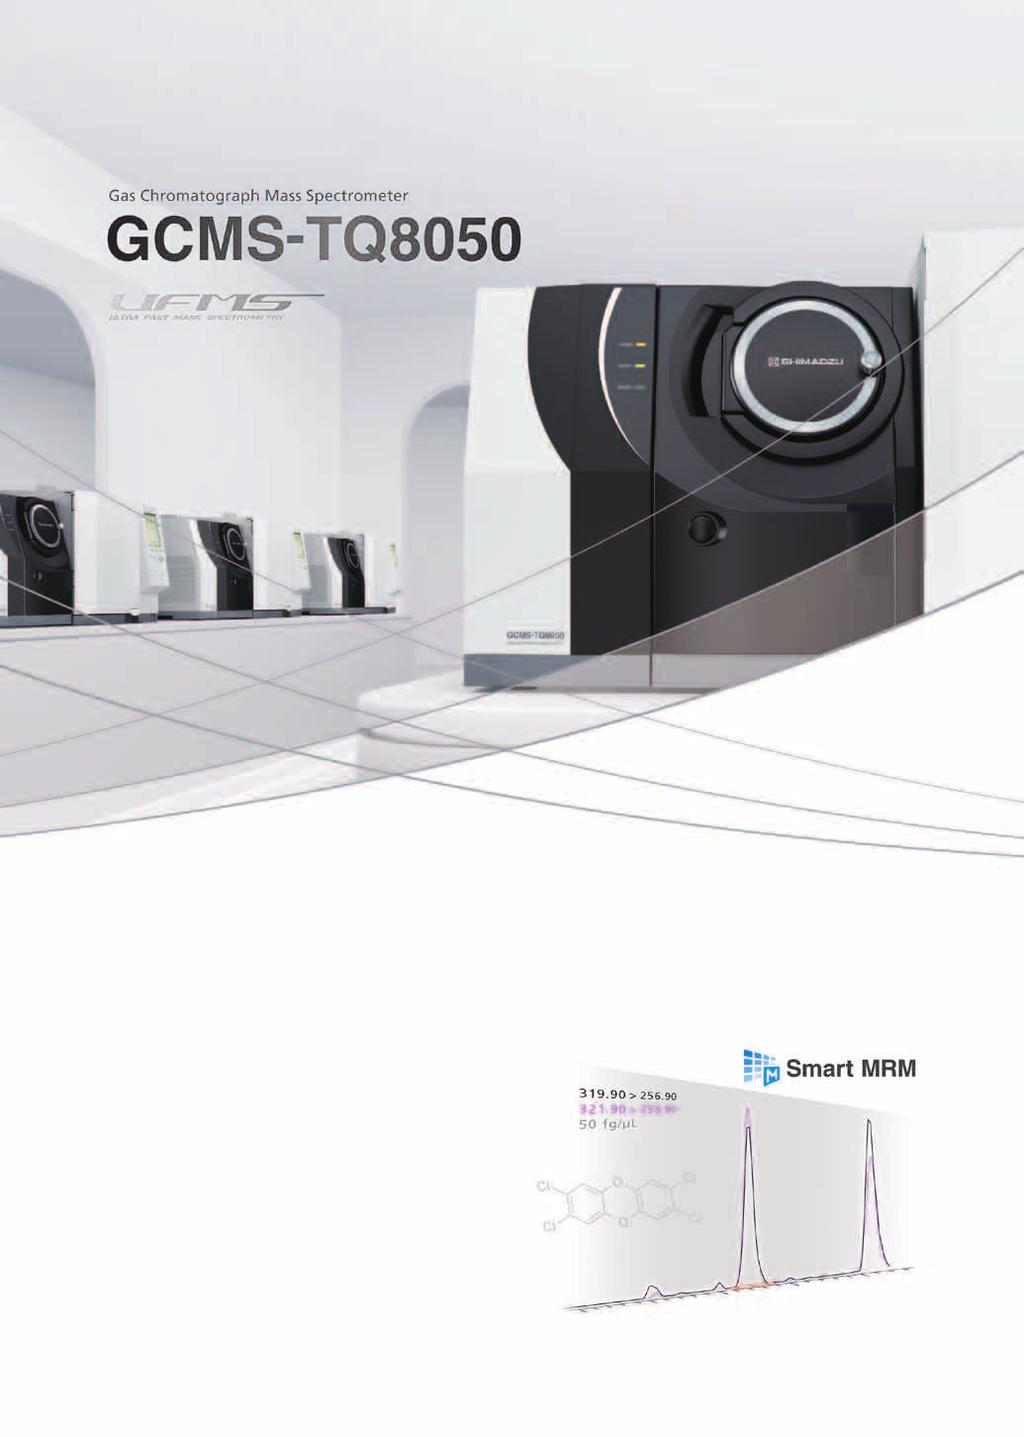 FORSCHUNG Smart Abilities Lead to New GC-MS/MS Possibilities The new GCMS-TQ8050 triple quadrupole mass spectrometer has been created based on continuously advancing Smart technologies that go beyond